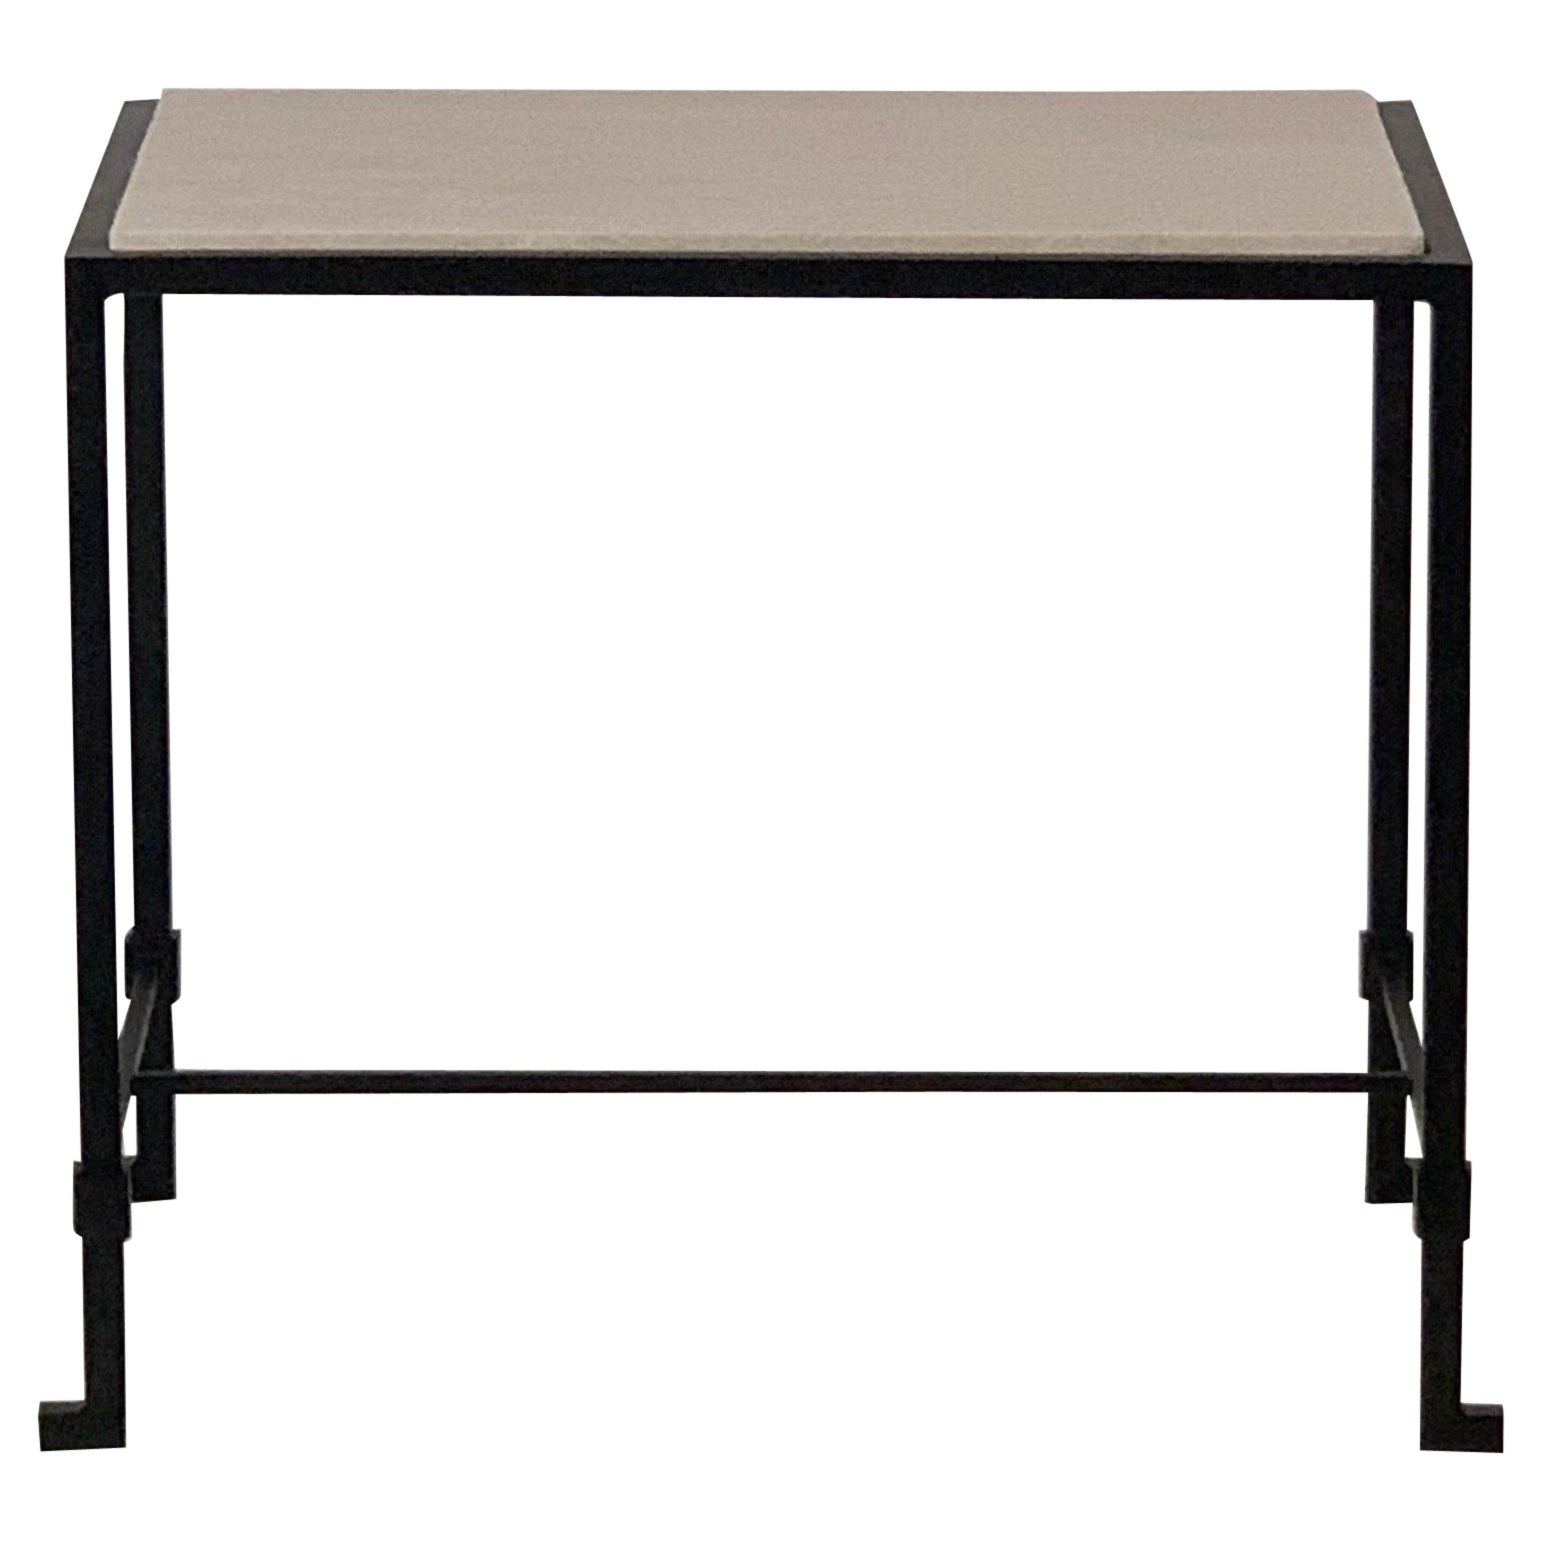 'Diagramme' Blackened Iron and Travertine Side or End Table by Design Frères